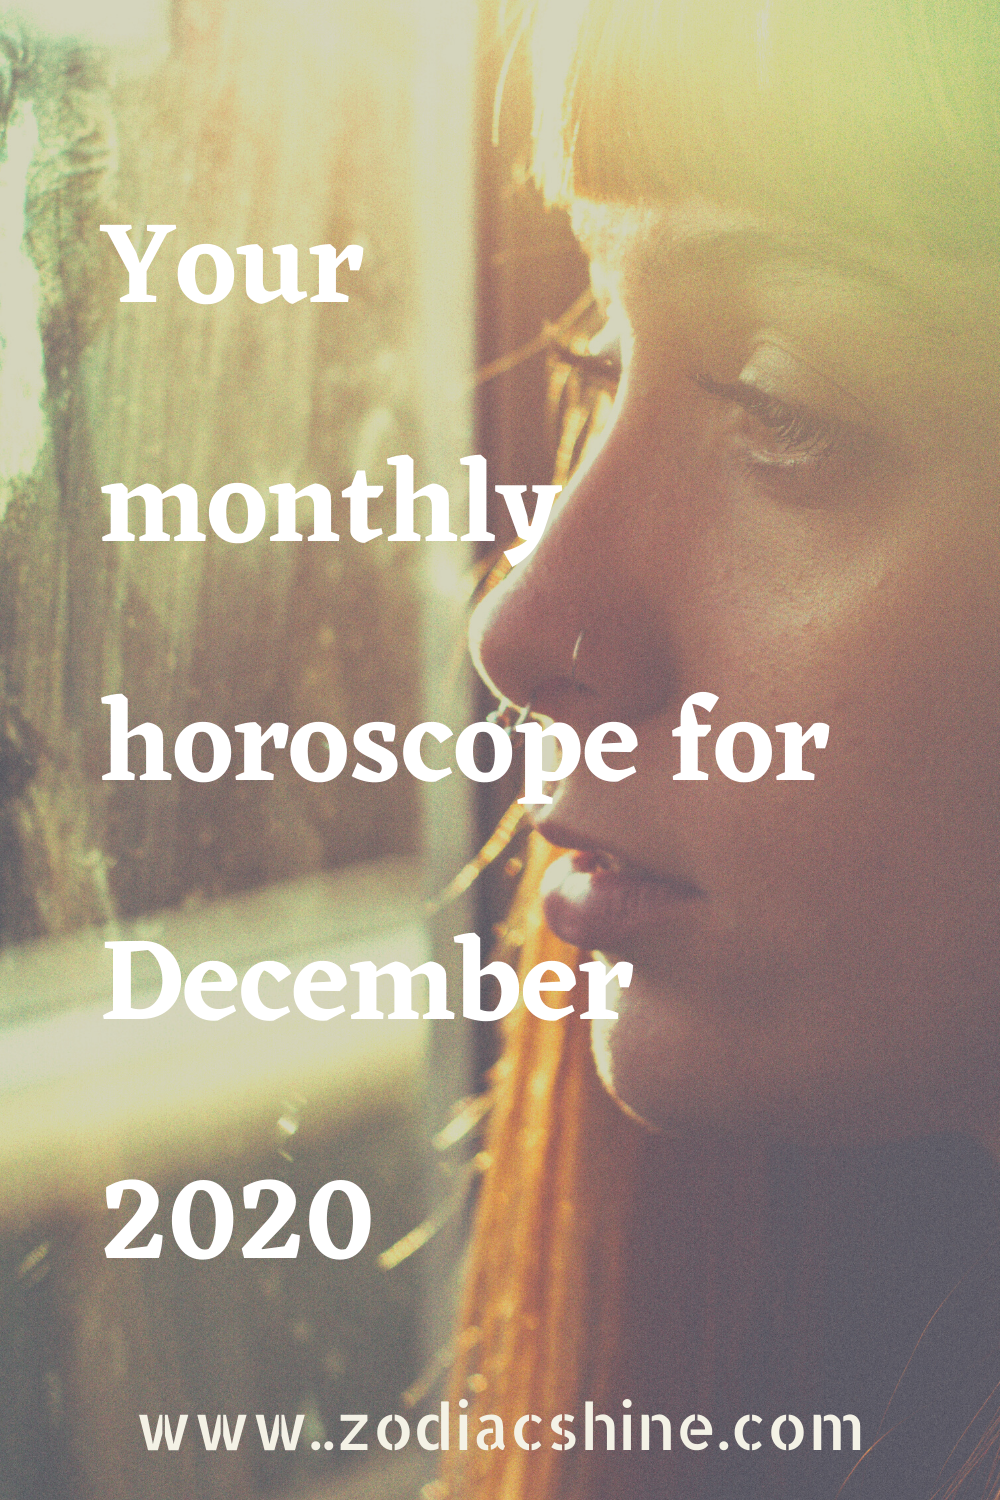 Your monthly horoscope for December 2020